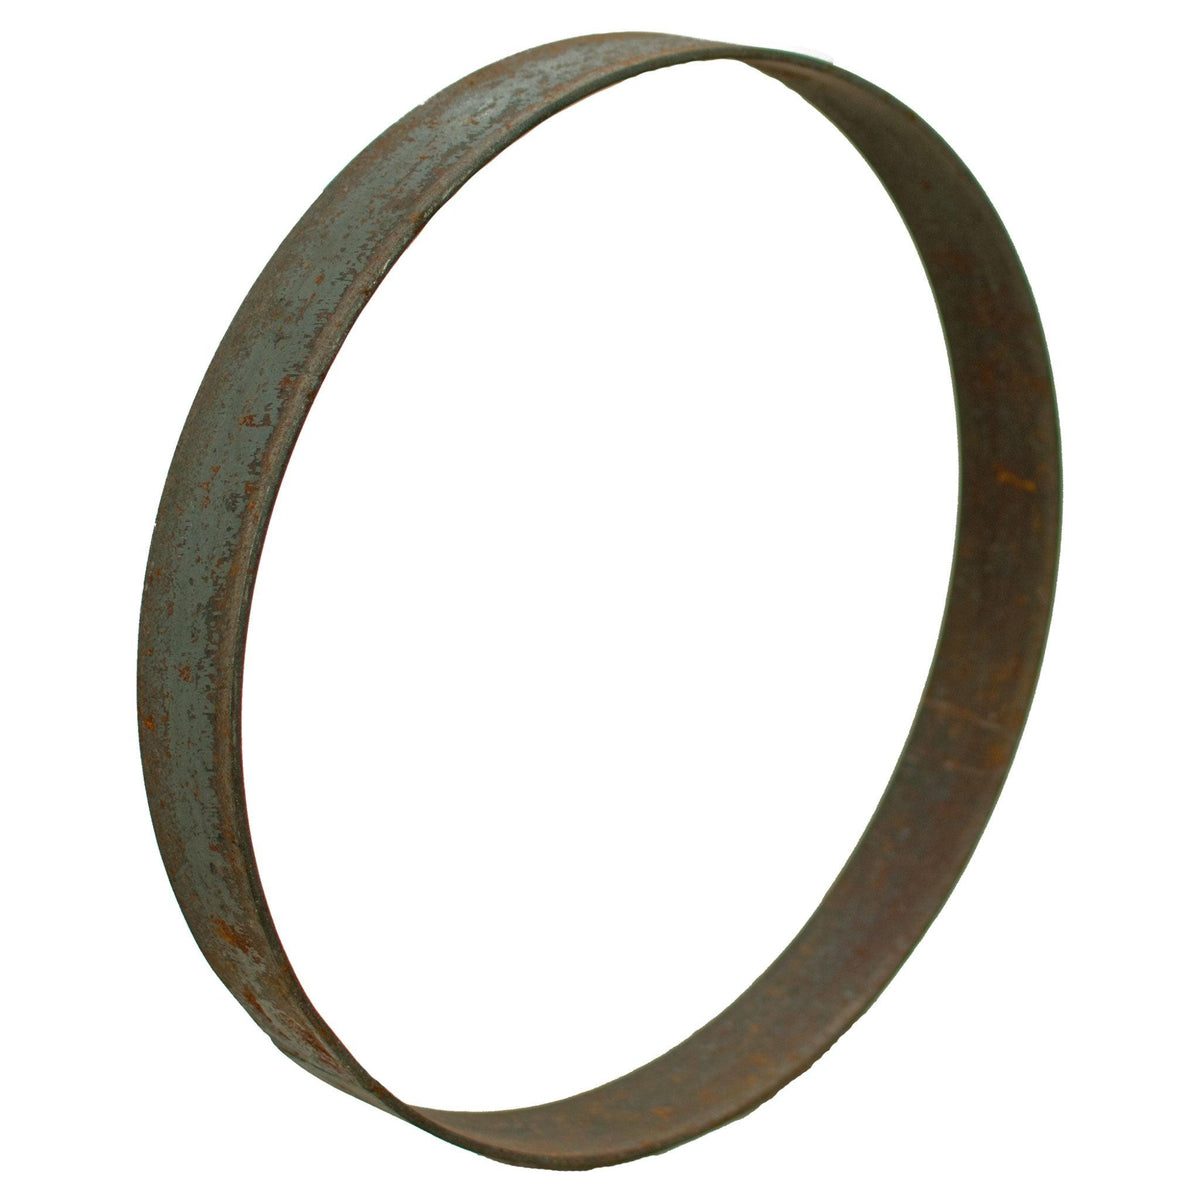 Custom size Steel Rings made by Lee Display    Made by hand in the US.  Lee Display manufactures custom-sized rings in steel.  Hand-rolled into perfect circles and welded together.  Choose over 1,000 different styles, sizes, and dimensions. Shop now at leedisplay.com